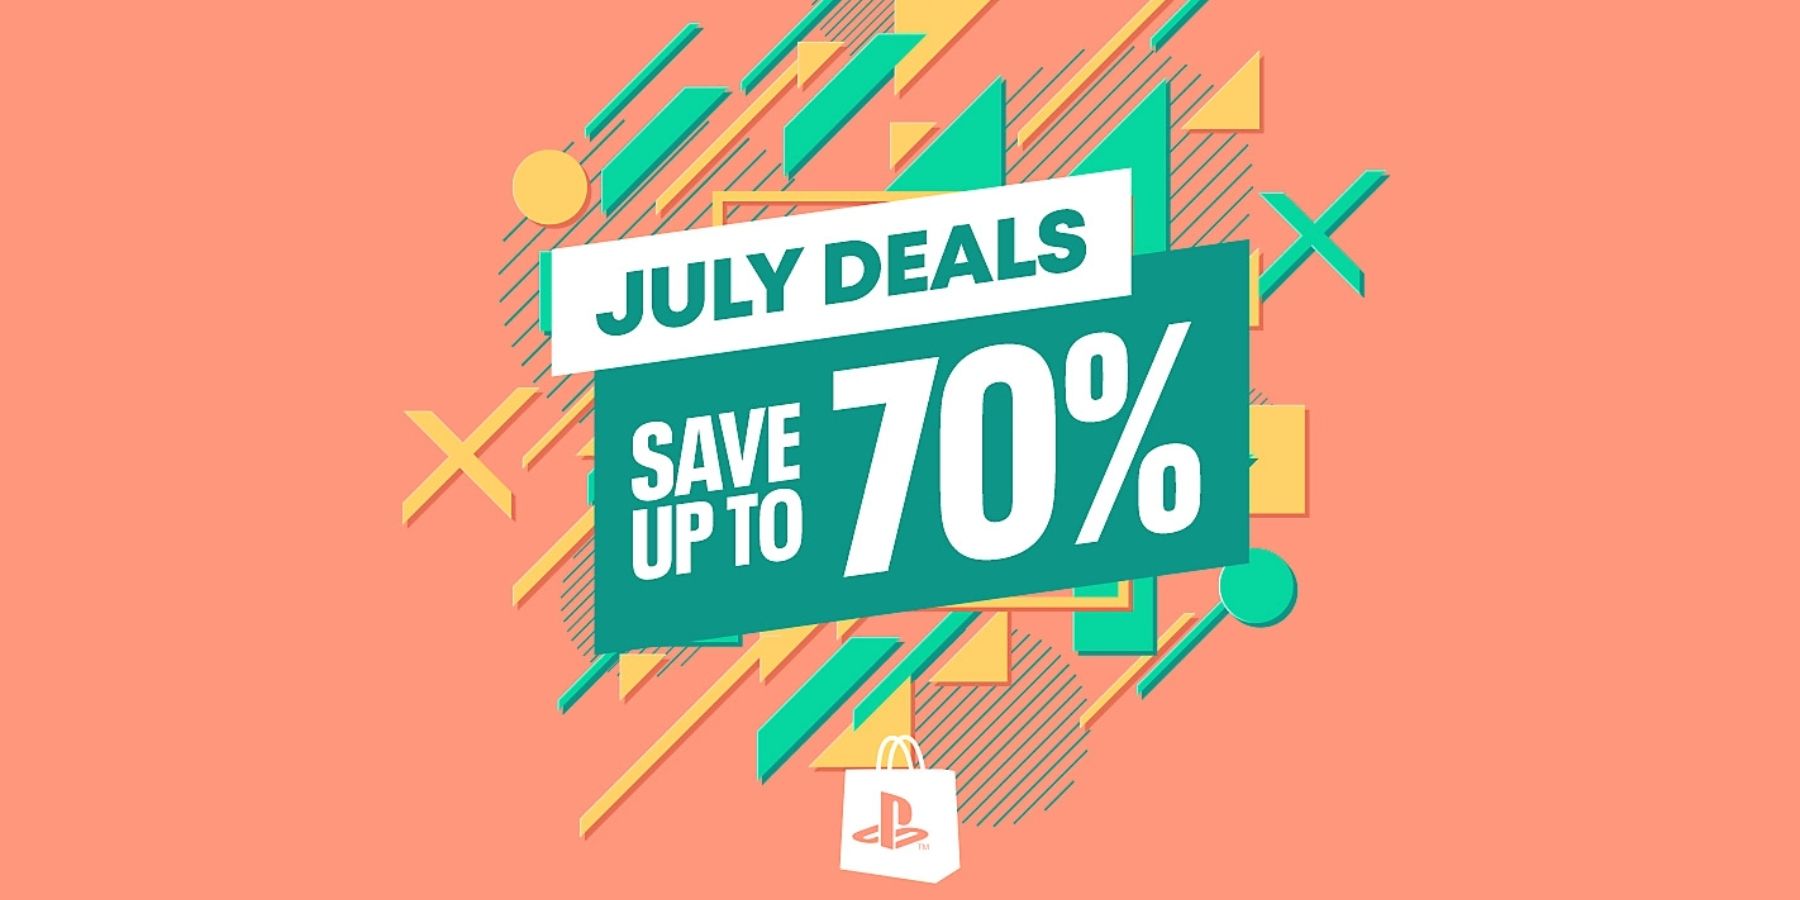 Best PlayStation Deals, Prices, and Bundles: July 2021